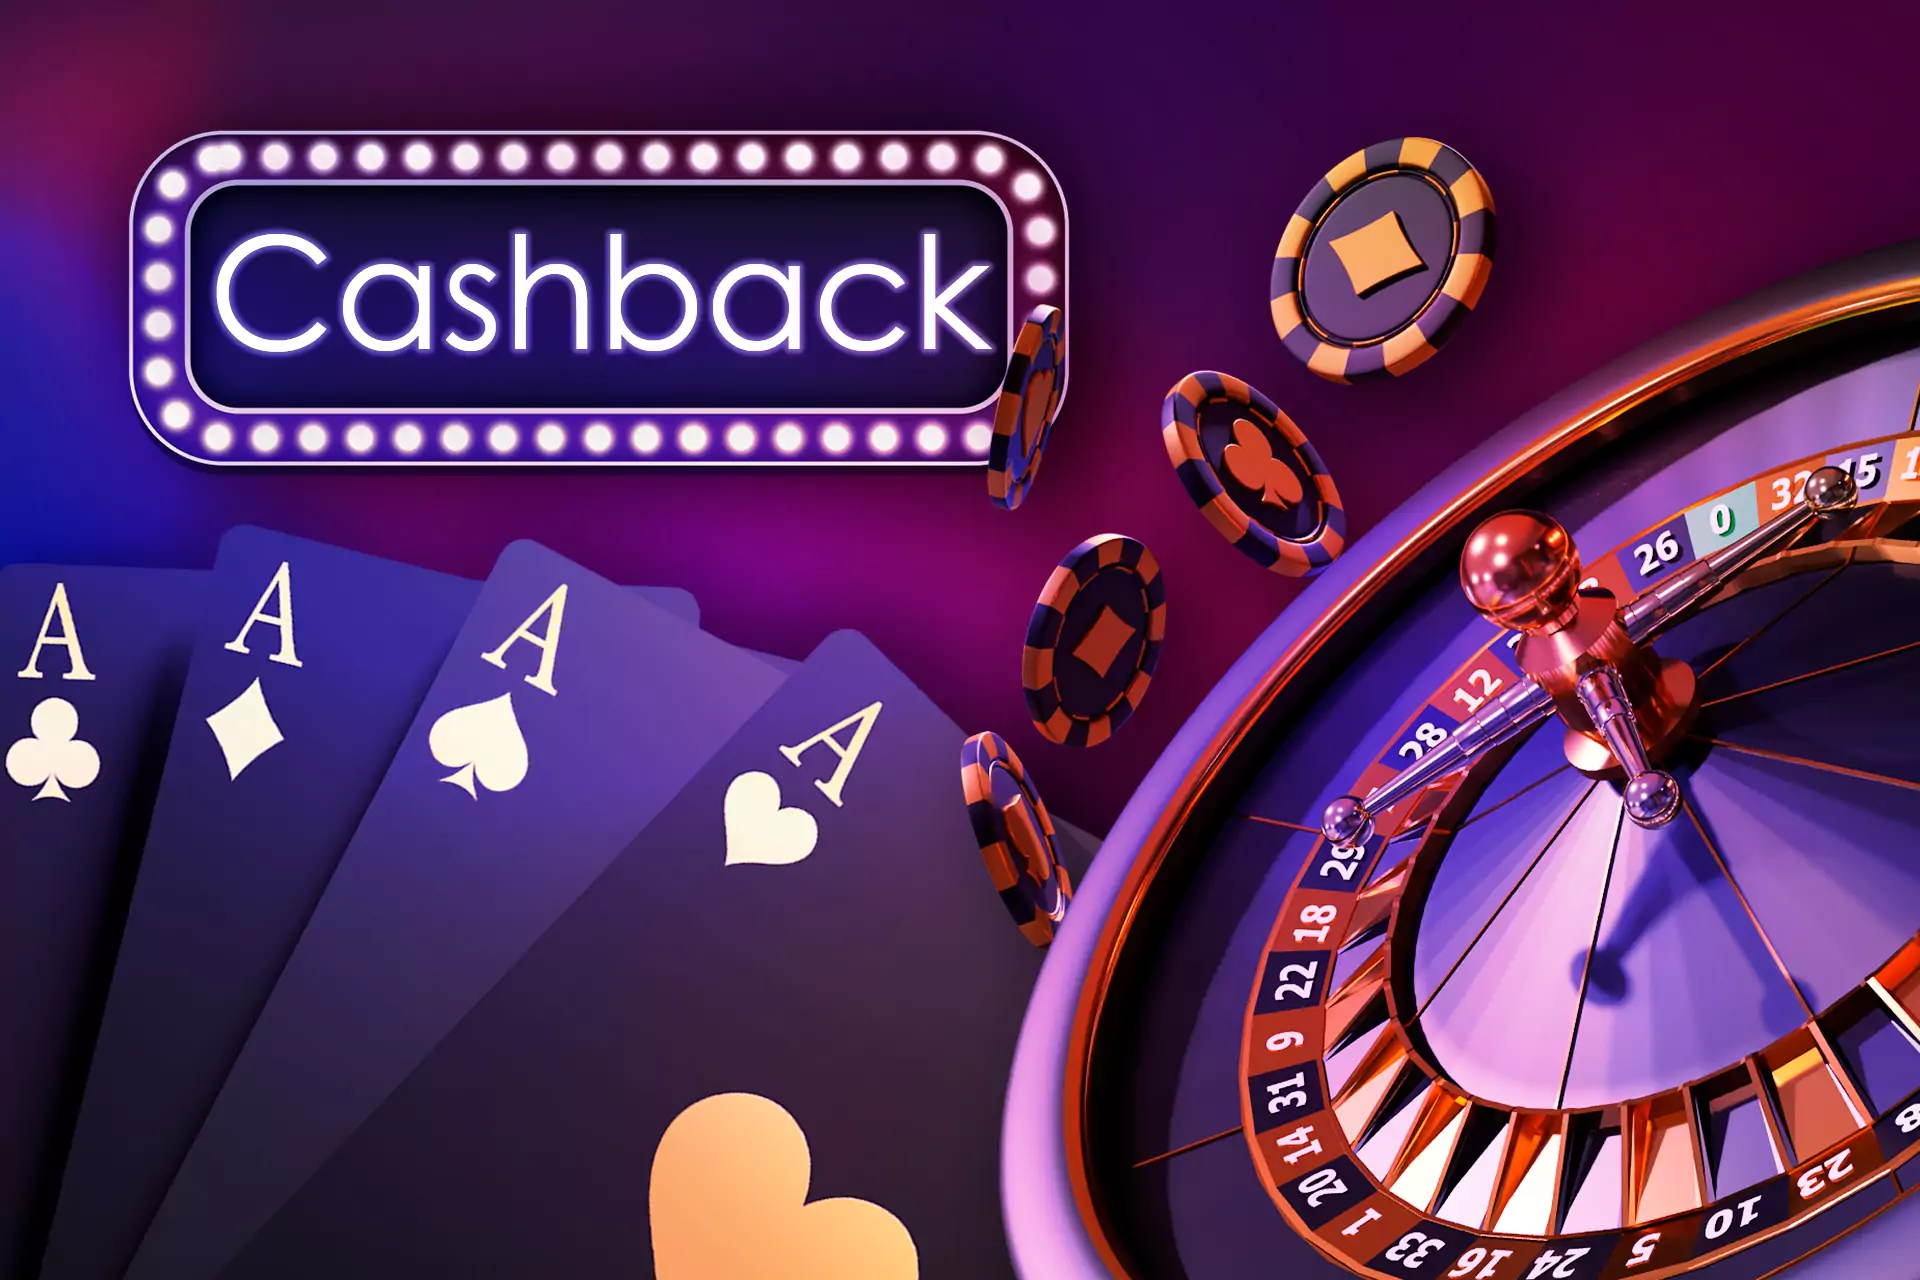 Cashback returns to your account after you spend some funds on casino games.